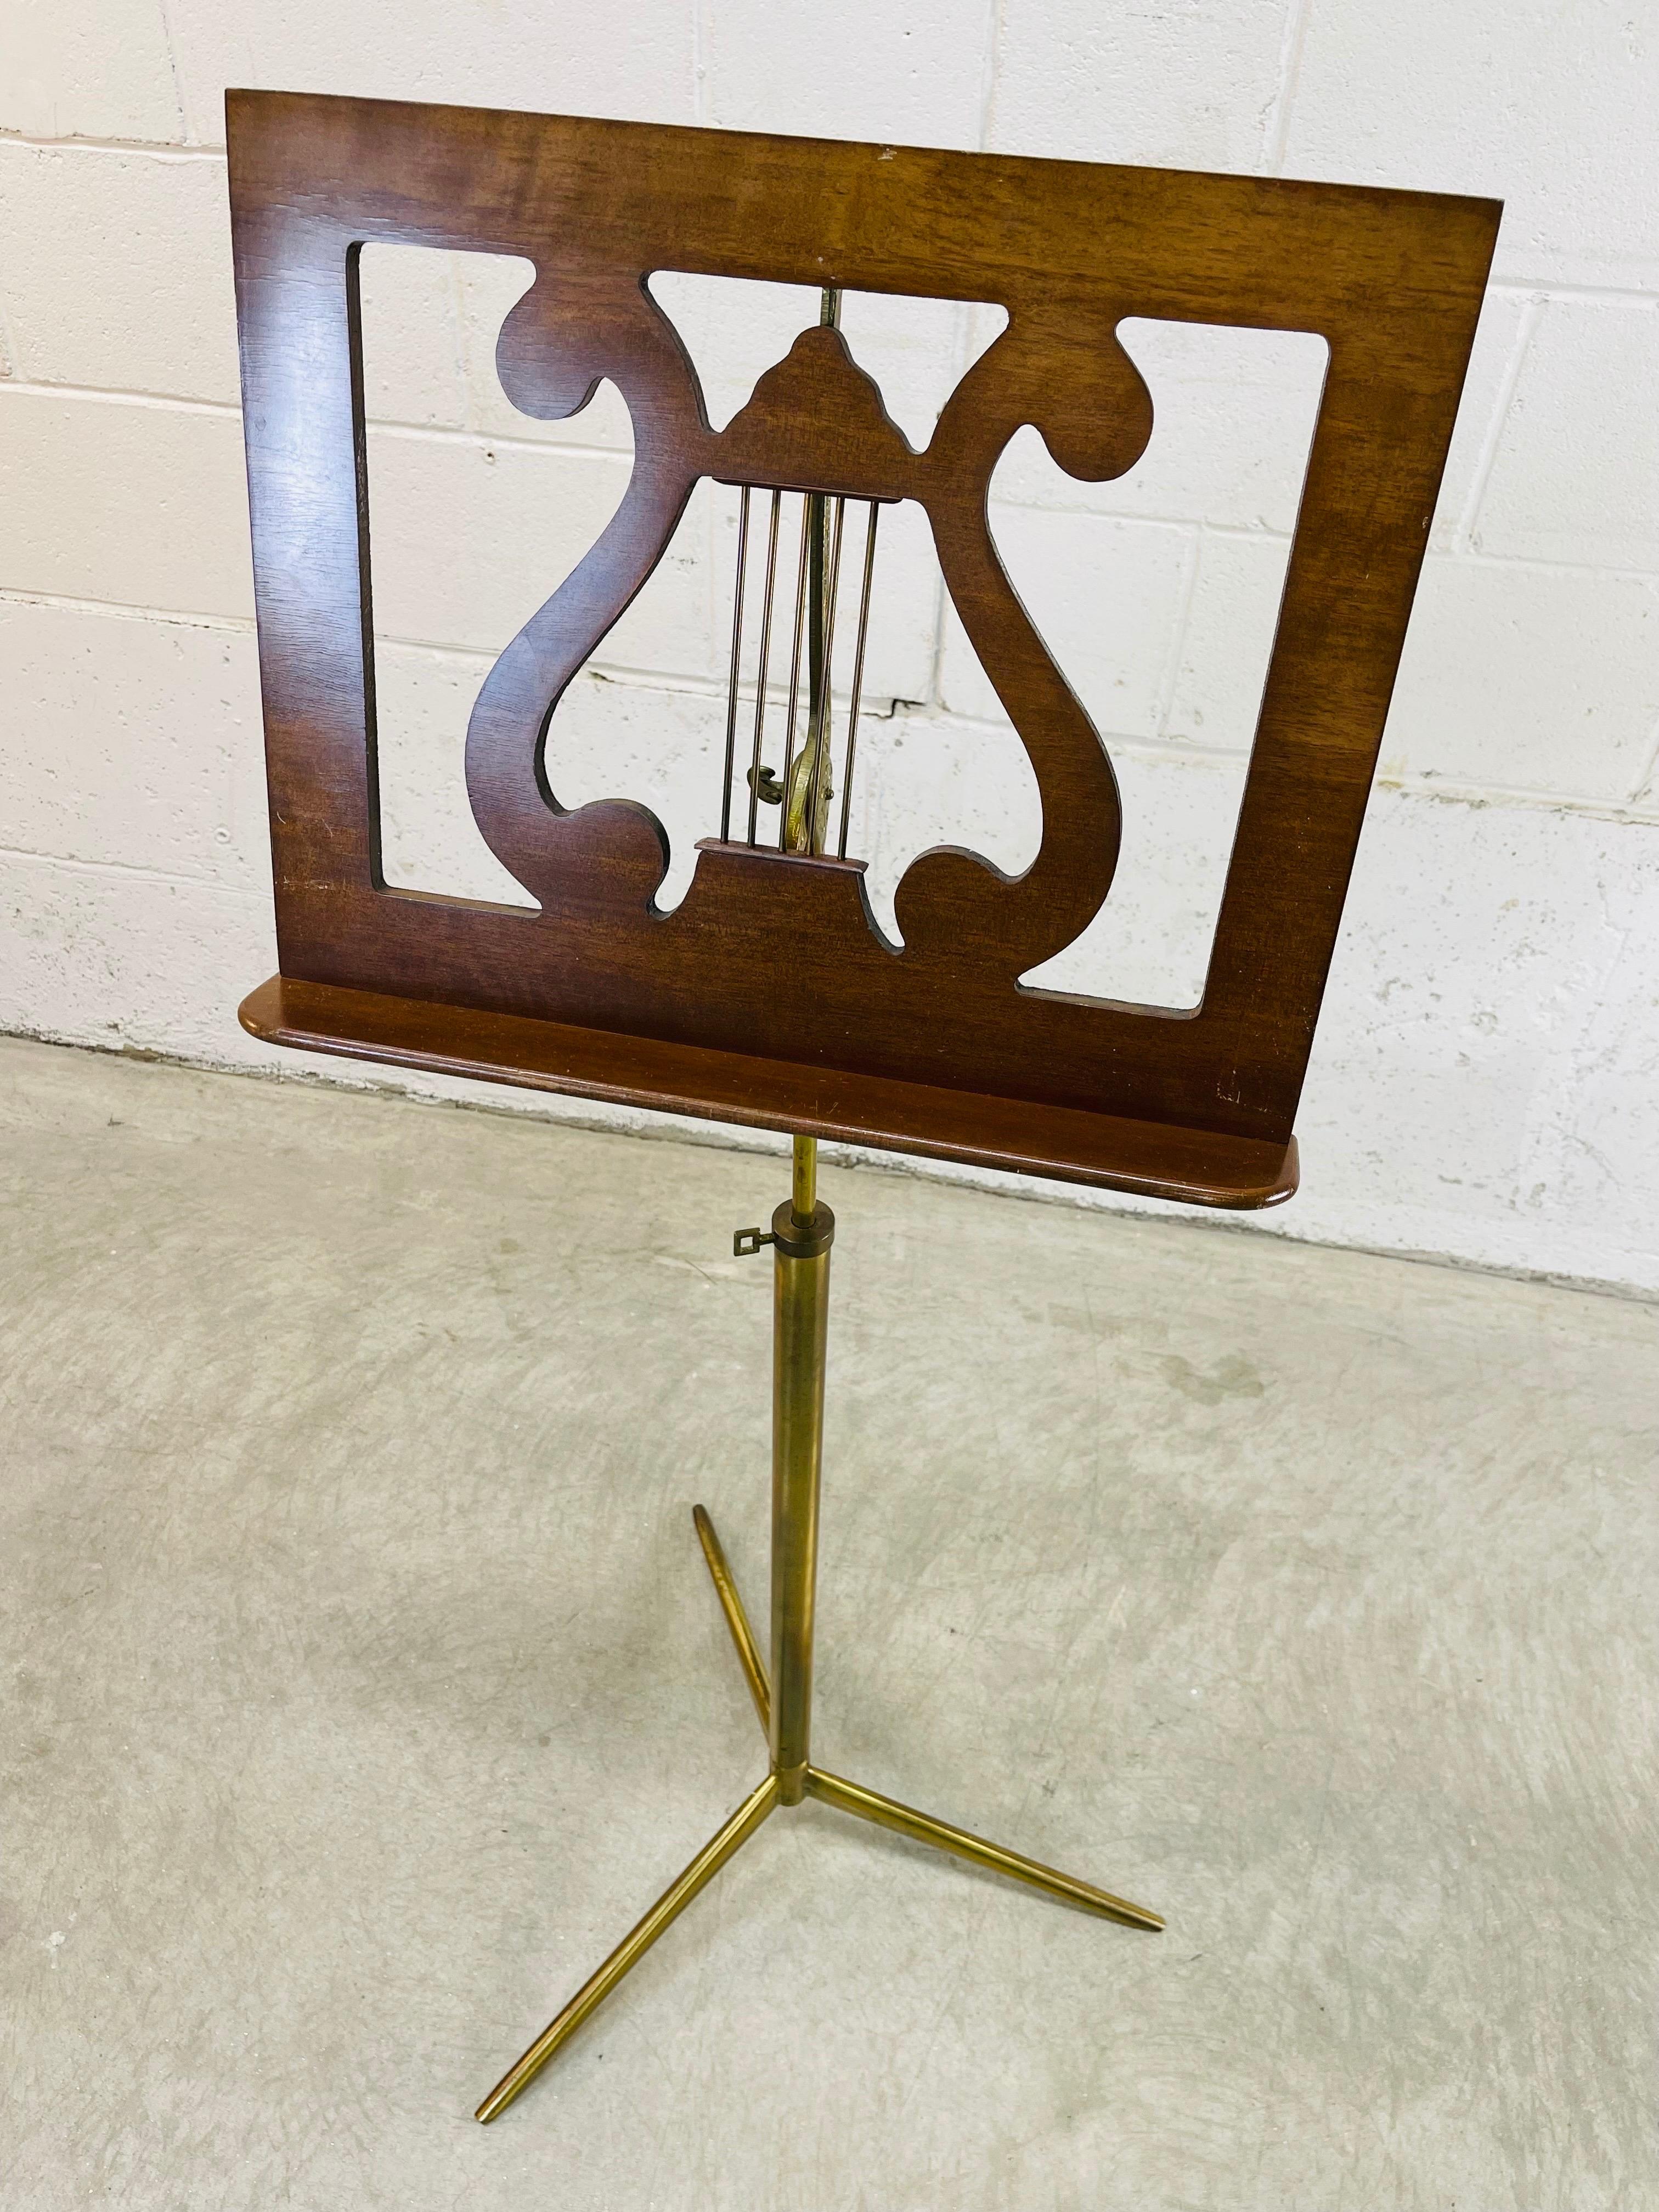 1960s Walnut wood and gold metal base sheet music stand. The sheet music holder is adjustable up and down and back and forth. The walnut holder measures 17.5”W x 14”H. It adjusts down to 40”H and as high as 50”H. No marks.